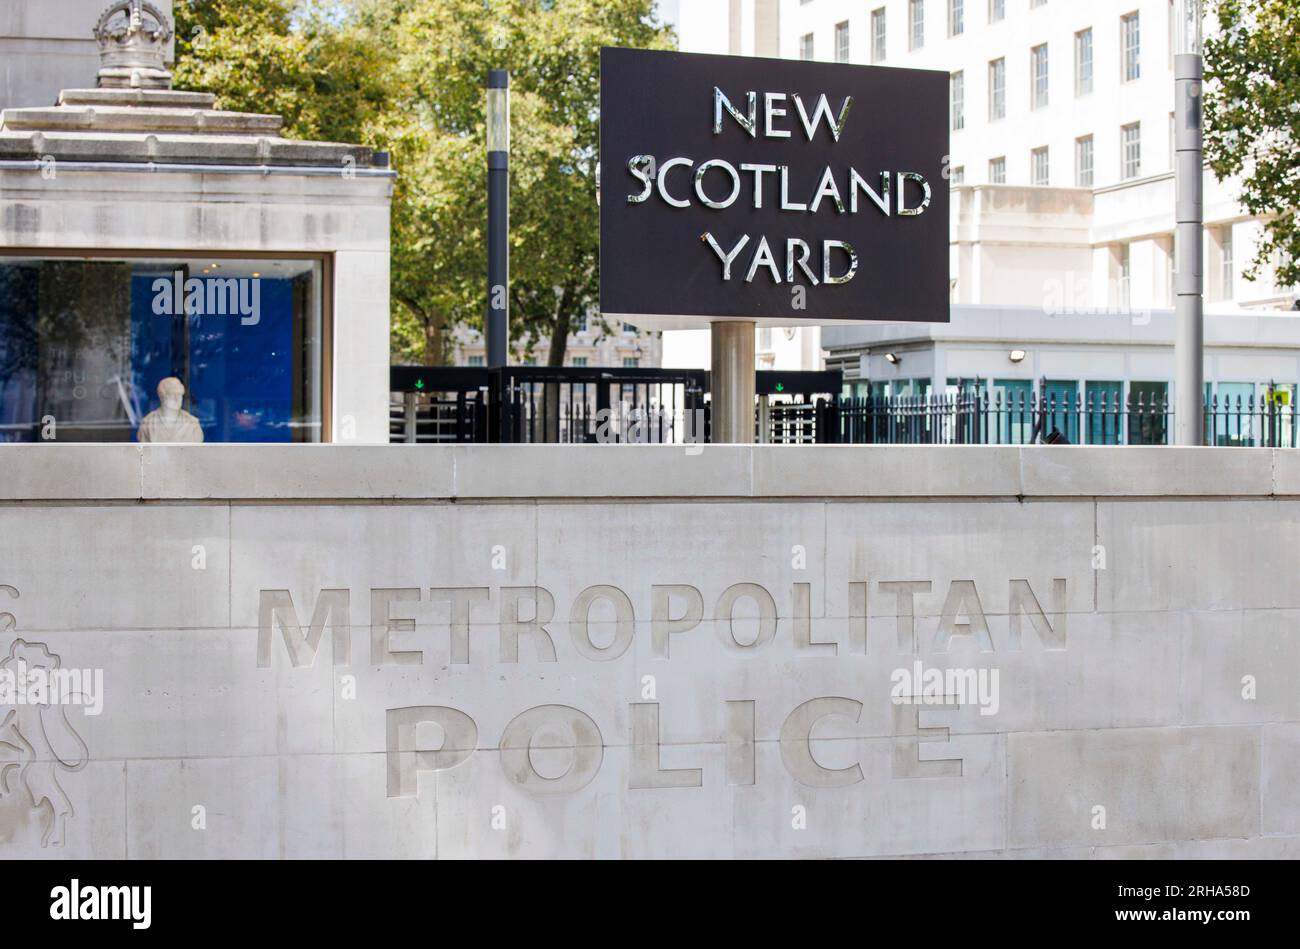 New Scotland Yard, Headquarters of the Metropolitan Police in Westminster, which has been part of the counter terrorism operation. Three Bulgarian nationals suspected of spying for Russia while living in the UK have been arrested and charged. The defendants were among five people detained in February following a long-running counter-terrorism investigation. Three of those were then charged with possession of false identity documents with improper intention, the Metropolitan police - which is responsible for espionage cases - said in a statement Stock Photo